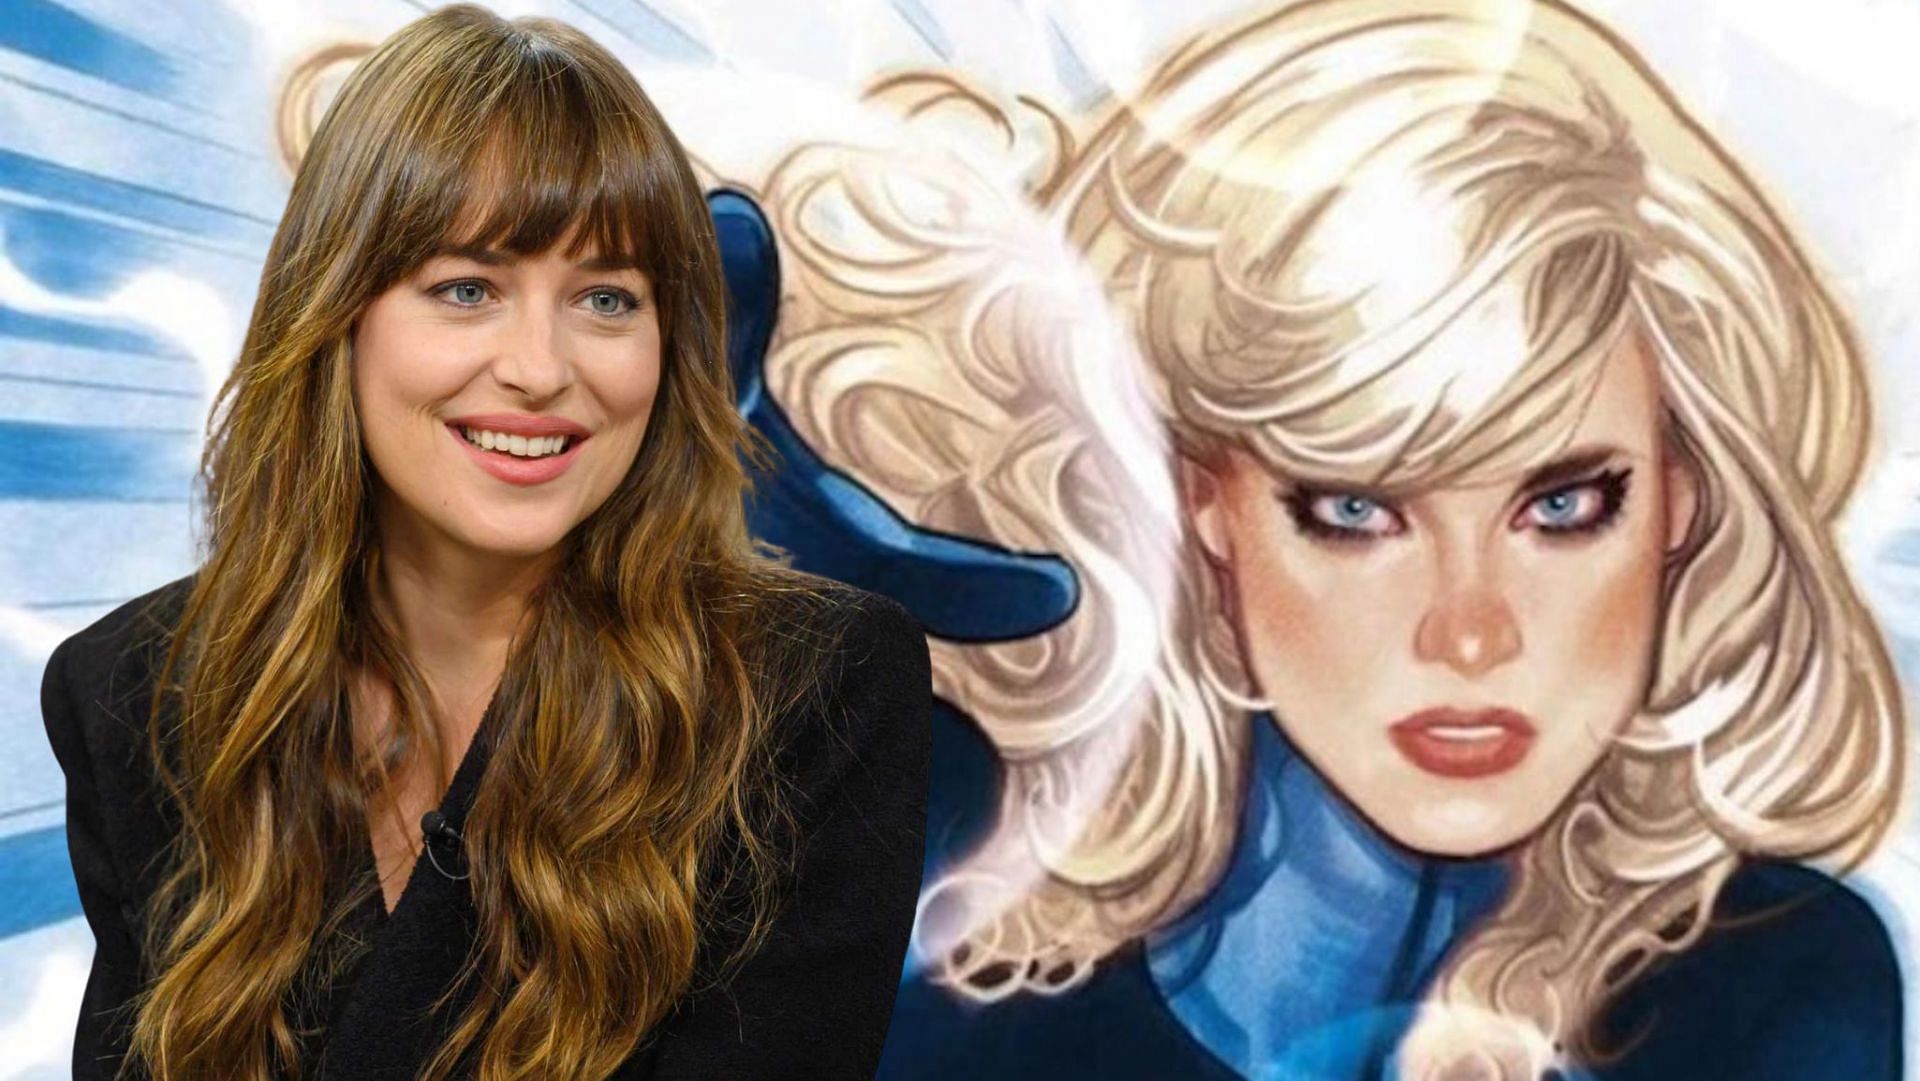 Marvel and Sony go head-to-head in a casting war for Dakota Johnson